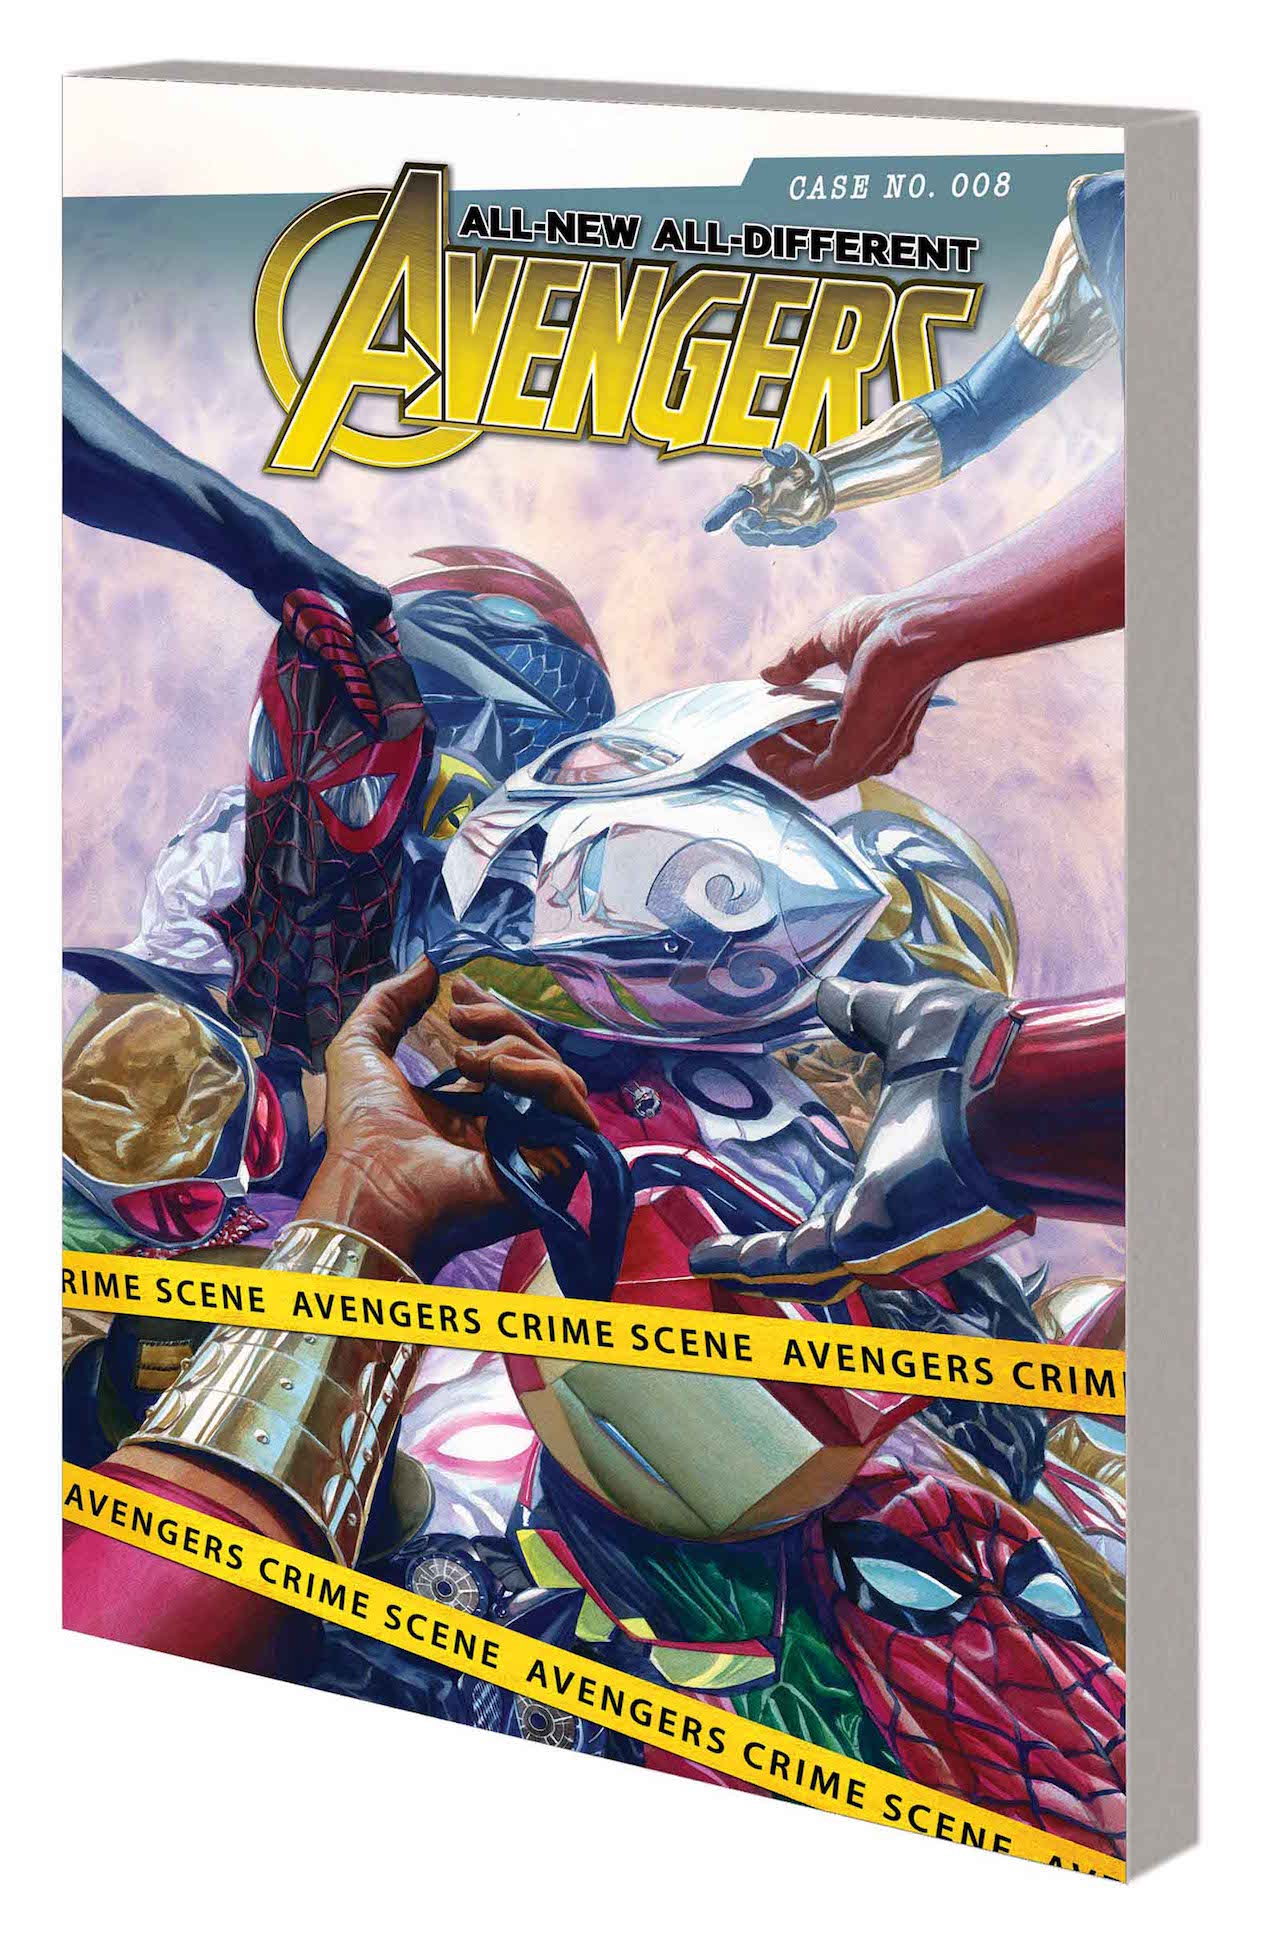 ALL-NEW, ALL-DIFFERENT AVENGERS VOL. 2: FAMILY BUSINESS TPB